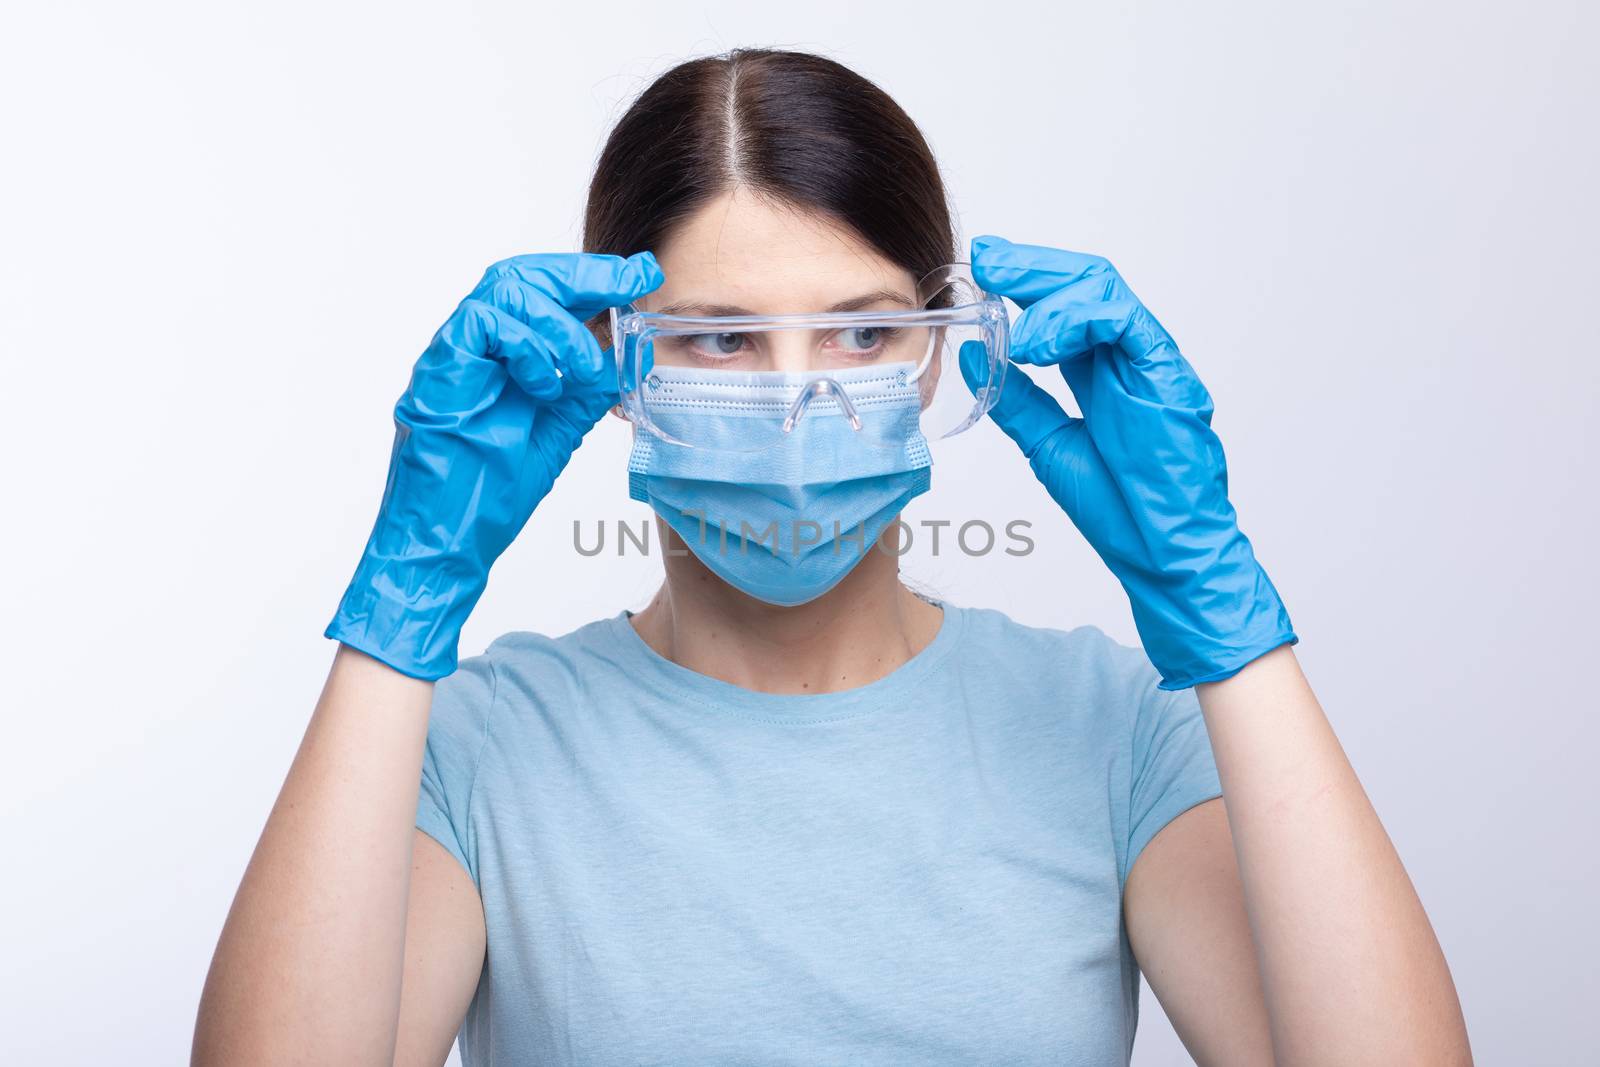 Nurse or doctor wearing and checking protective equipment against viruses and bacterial disease stock photo